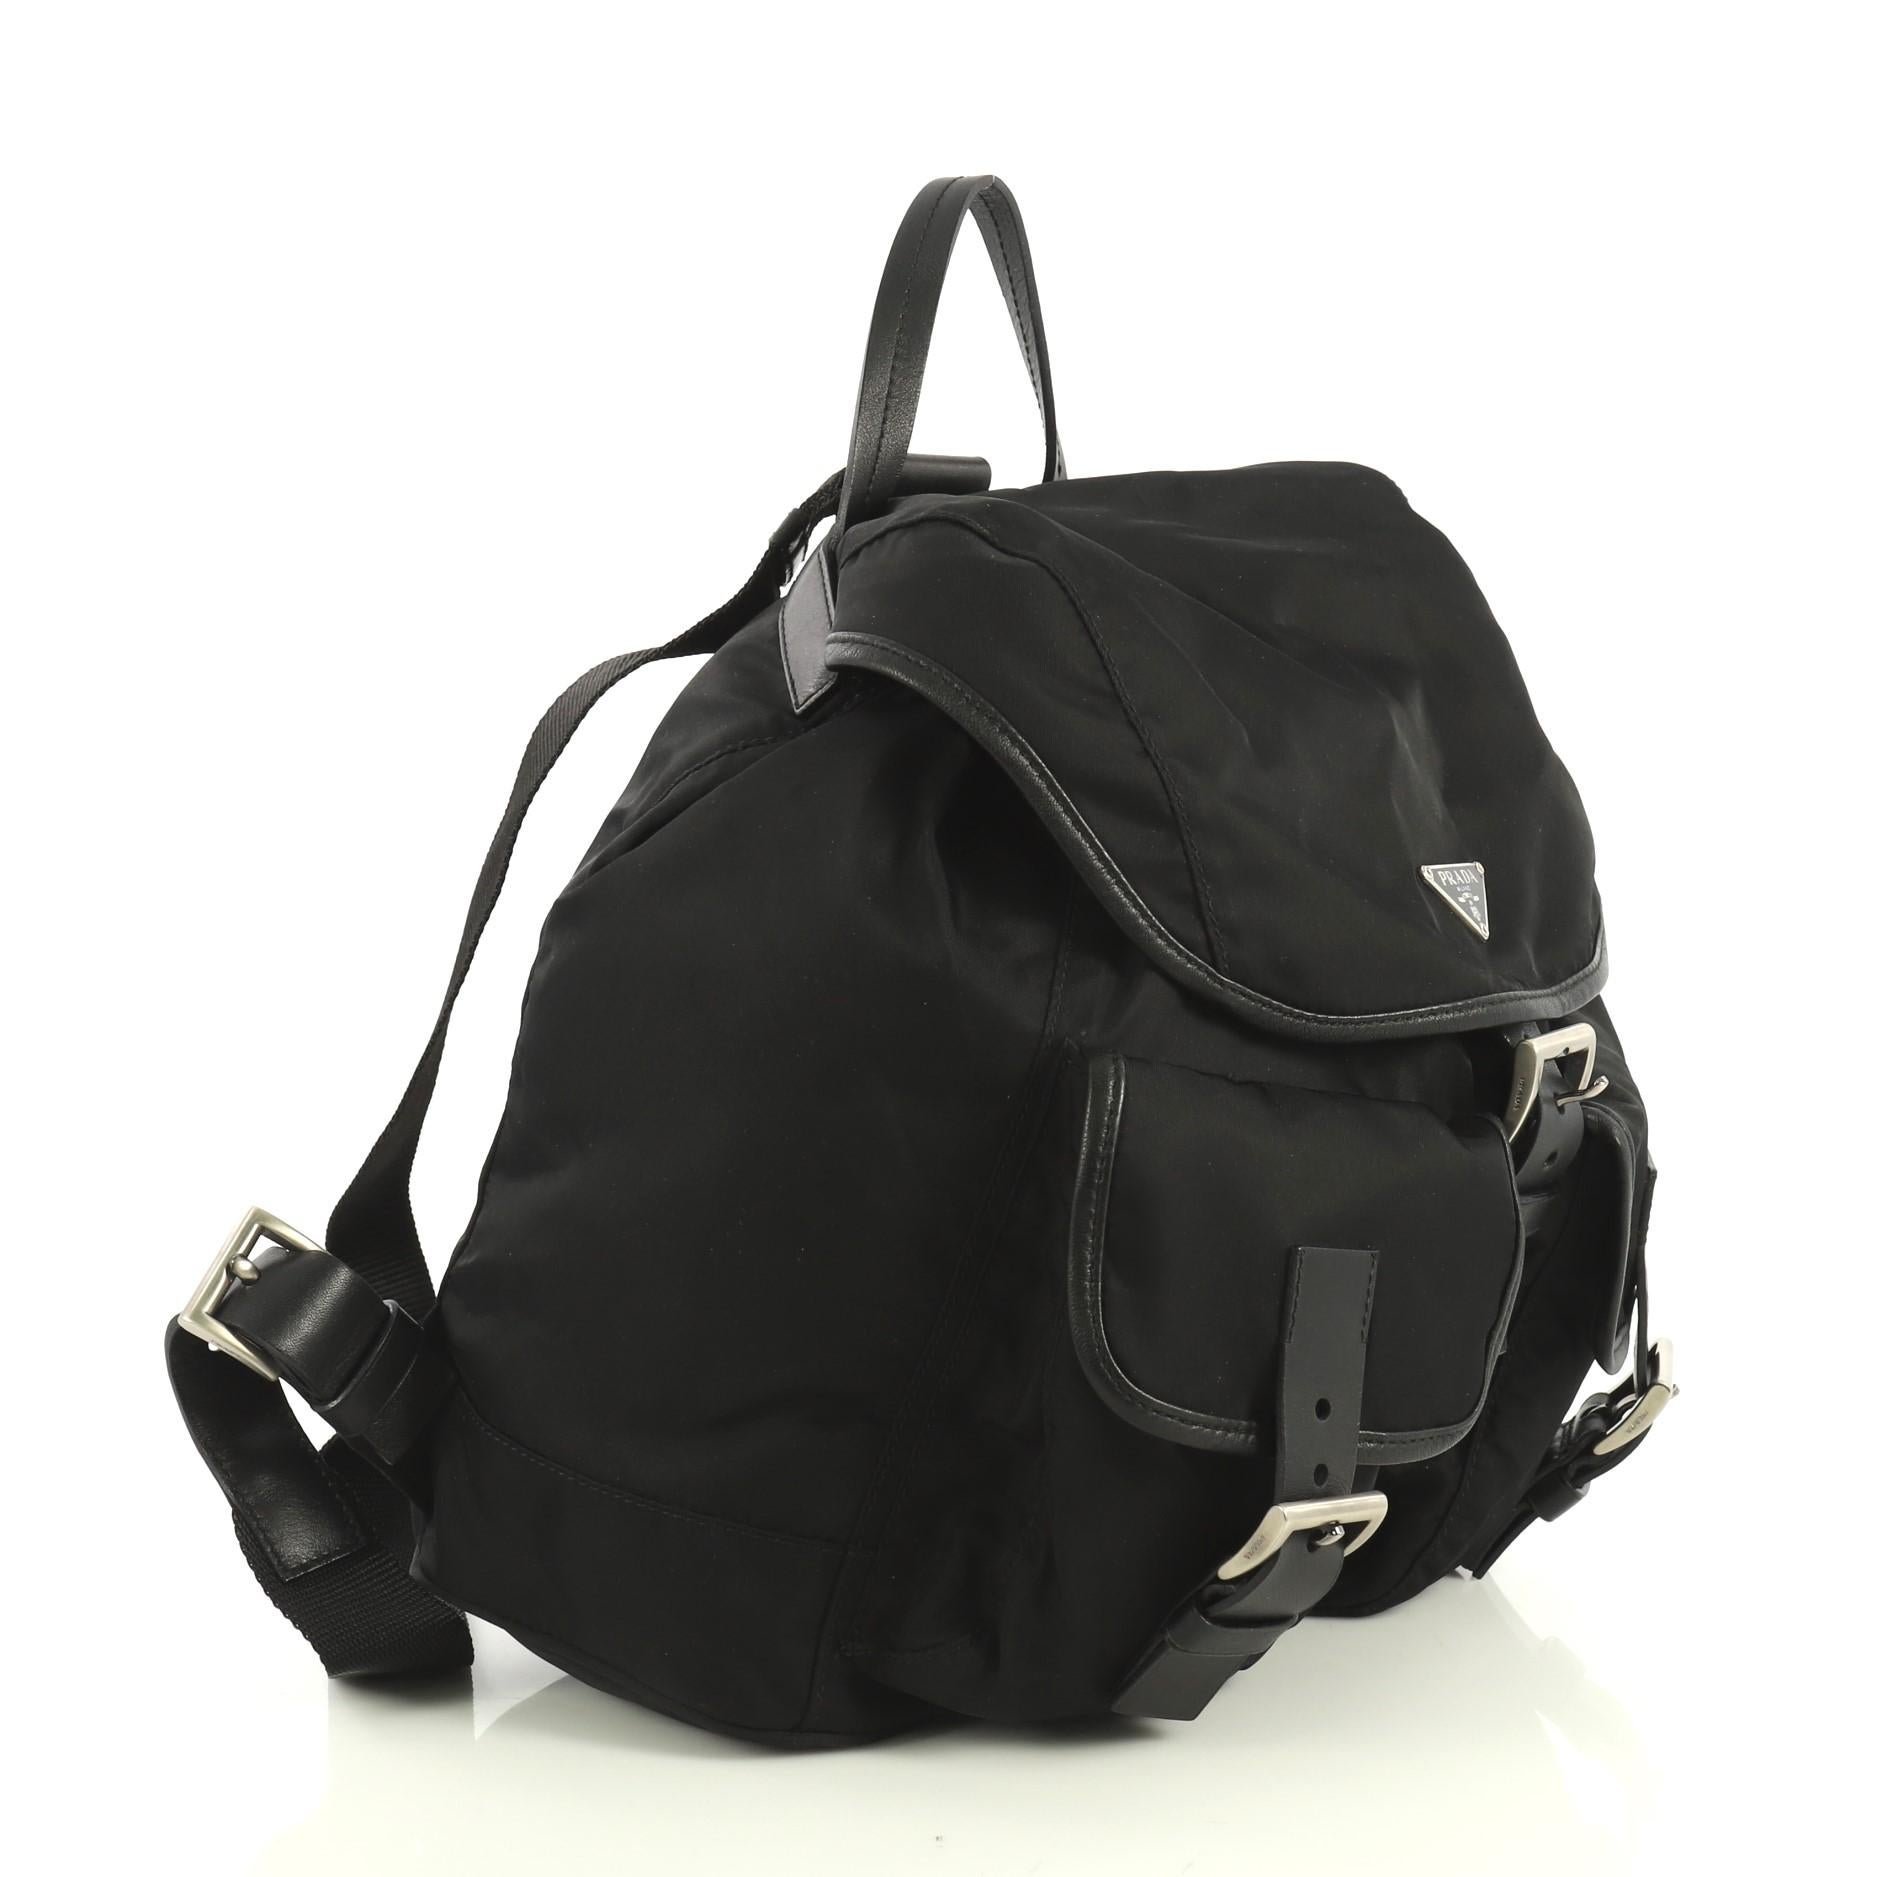 This Prada Double Front Pocket Backpack Tessuto Medium, crafted in black tessuto nylon, features a top carry handle, adjustable shoulder straps, top flap with buckle closure, exterior front pockets, and silver-tone hardware. Its drawstring closure